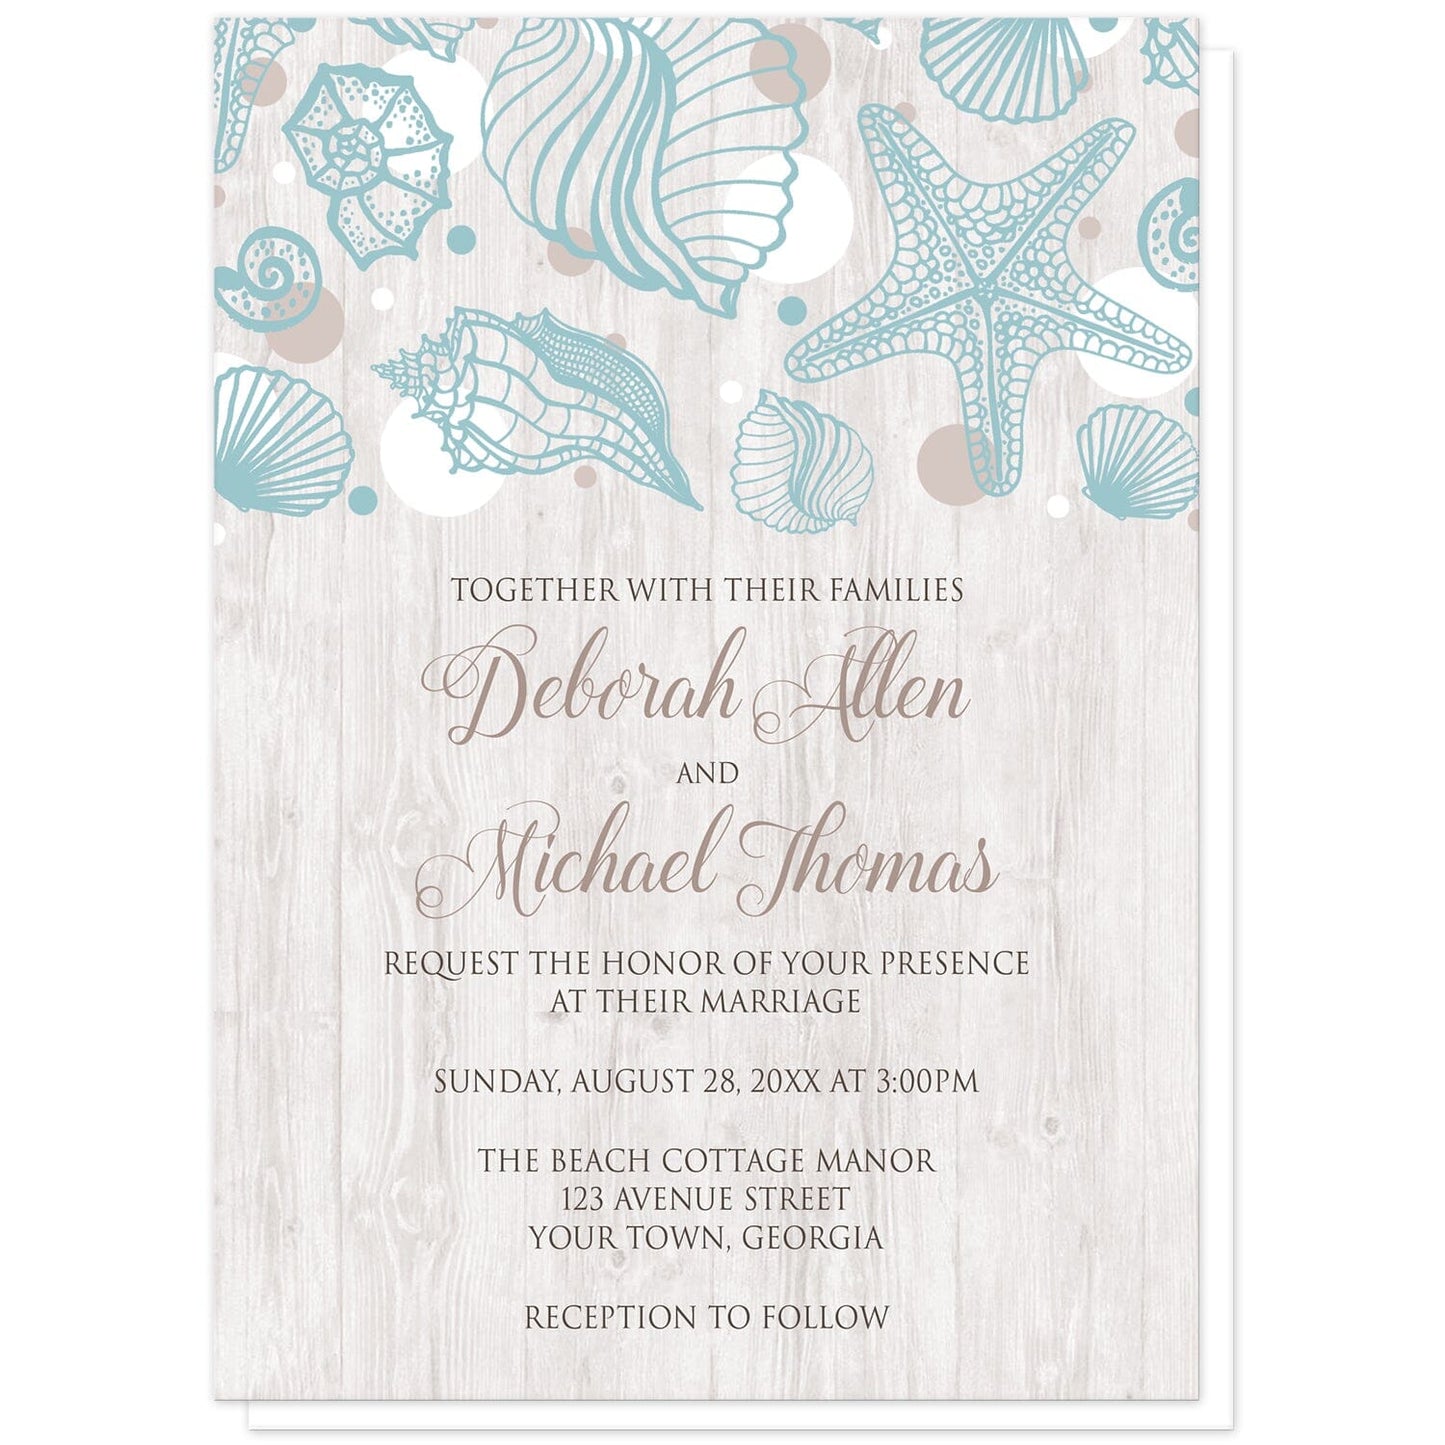 Seashell Whitewashed Wood Beach Wedding Invitations at Artistically Invited. Rustic-chic seashell whitewashed wood beach wedding invitations with a turquoise seashell line drawing with accent tan and white dots over a light whitewashed wood illustration. Your personalized marriage celebration details are custom printed in tan and brown over the whitewashed wood background below the seashells.